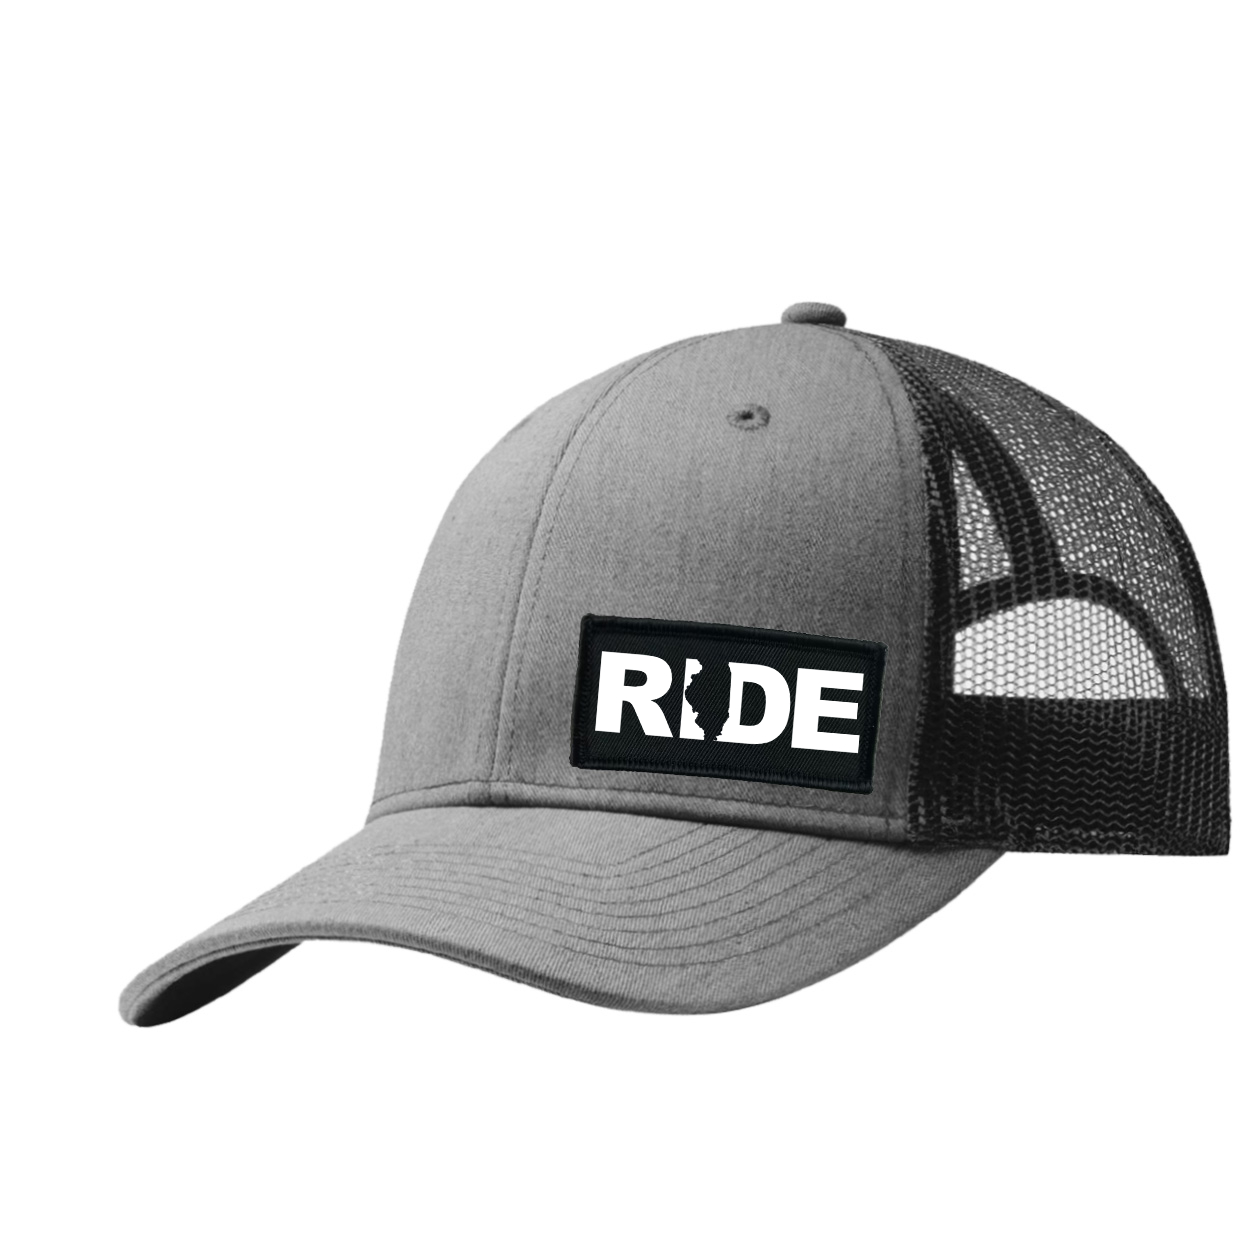 Ride Illinois Night Out Woven Patch Snapback Trucker Hat Heather Gray/Black (White Logo)